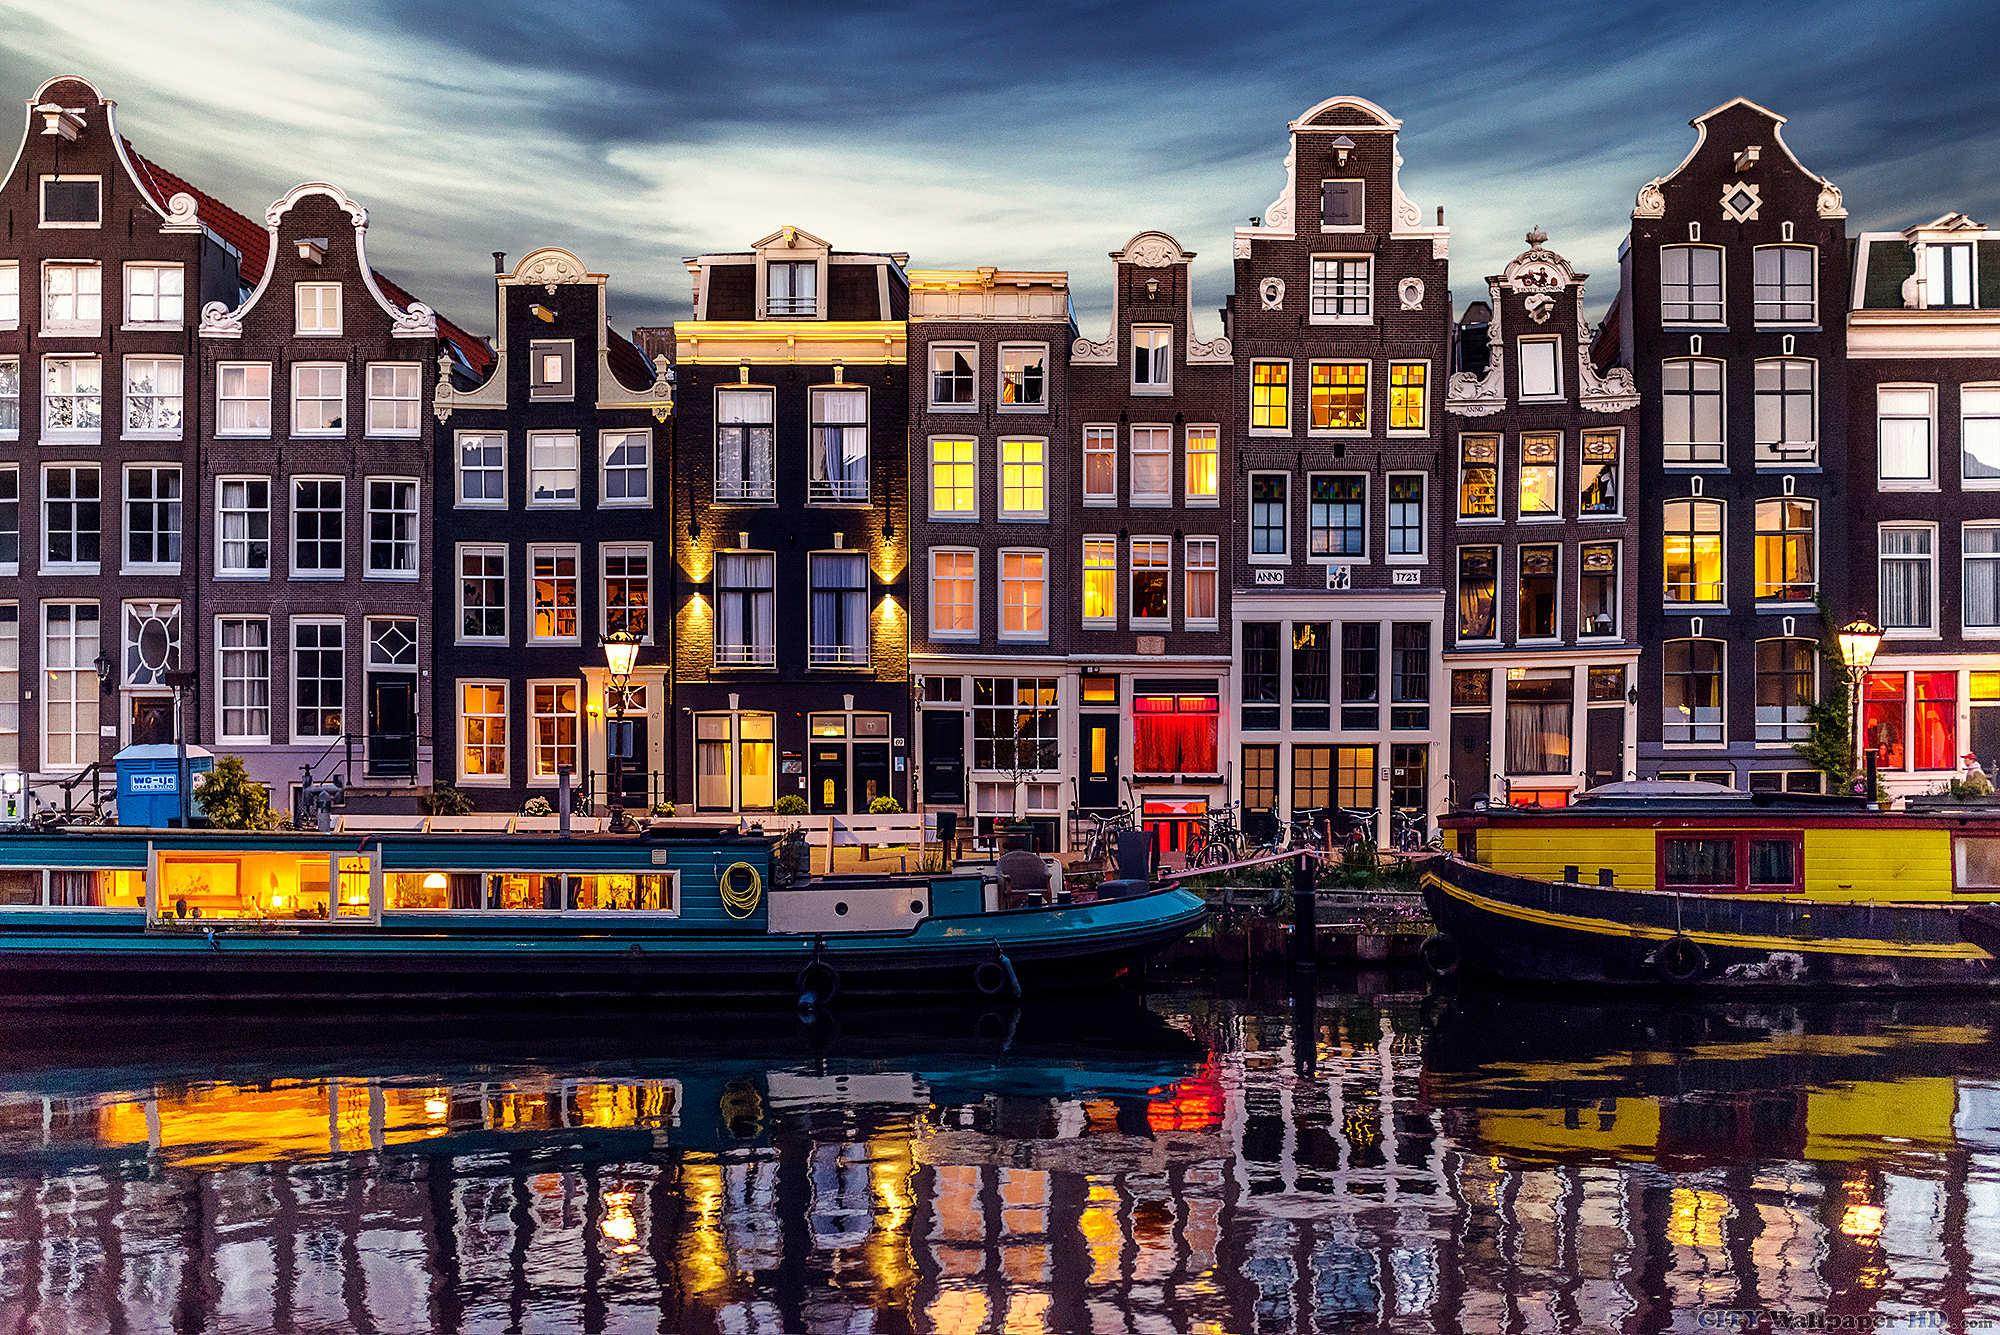 Amsterdam wallpaper. Photo mobile cities and countries. Amsterdam, the Netherlands capital